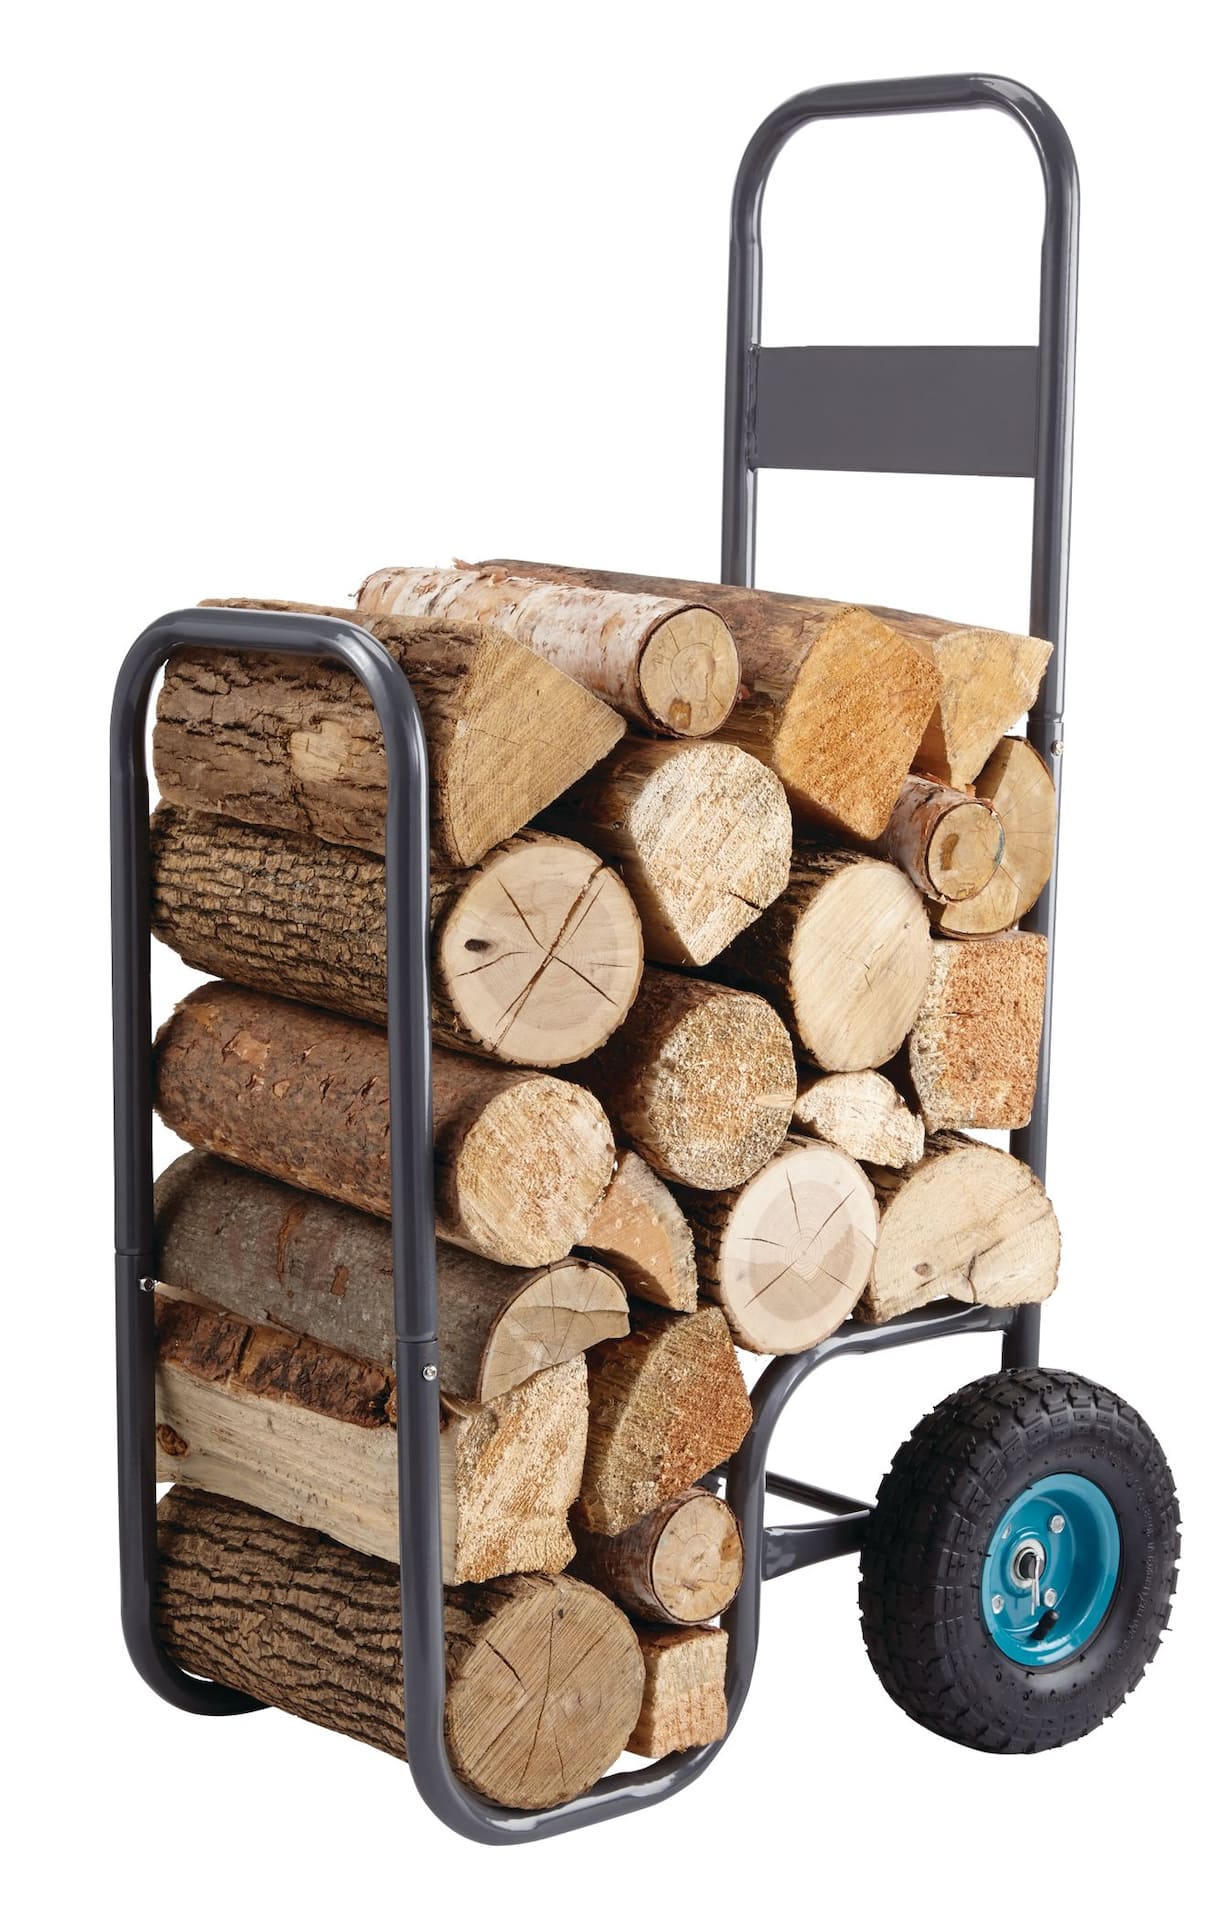 Yardworks Portable Steel Construction Firewood/Log Caddy, 176 lb, includes  Cover